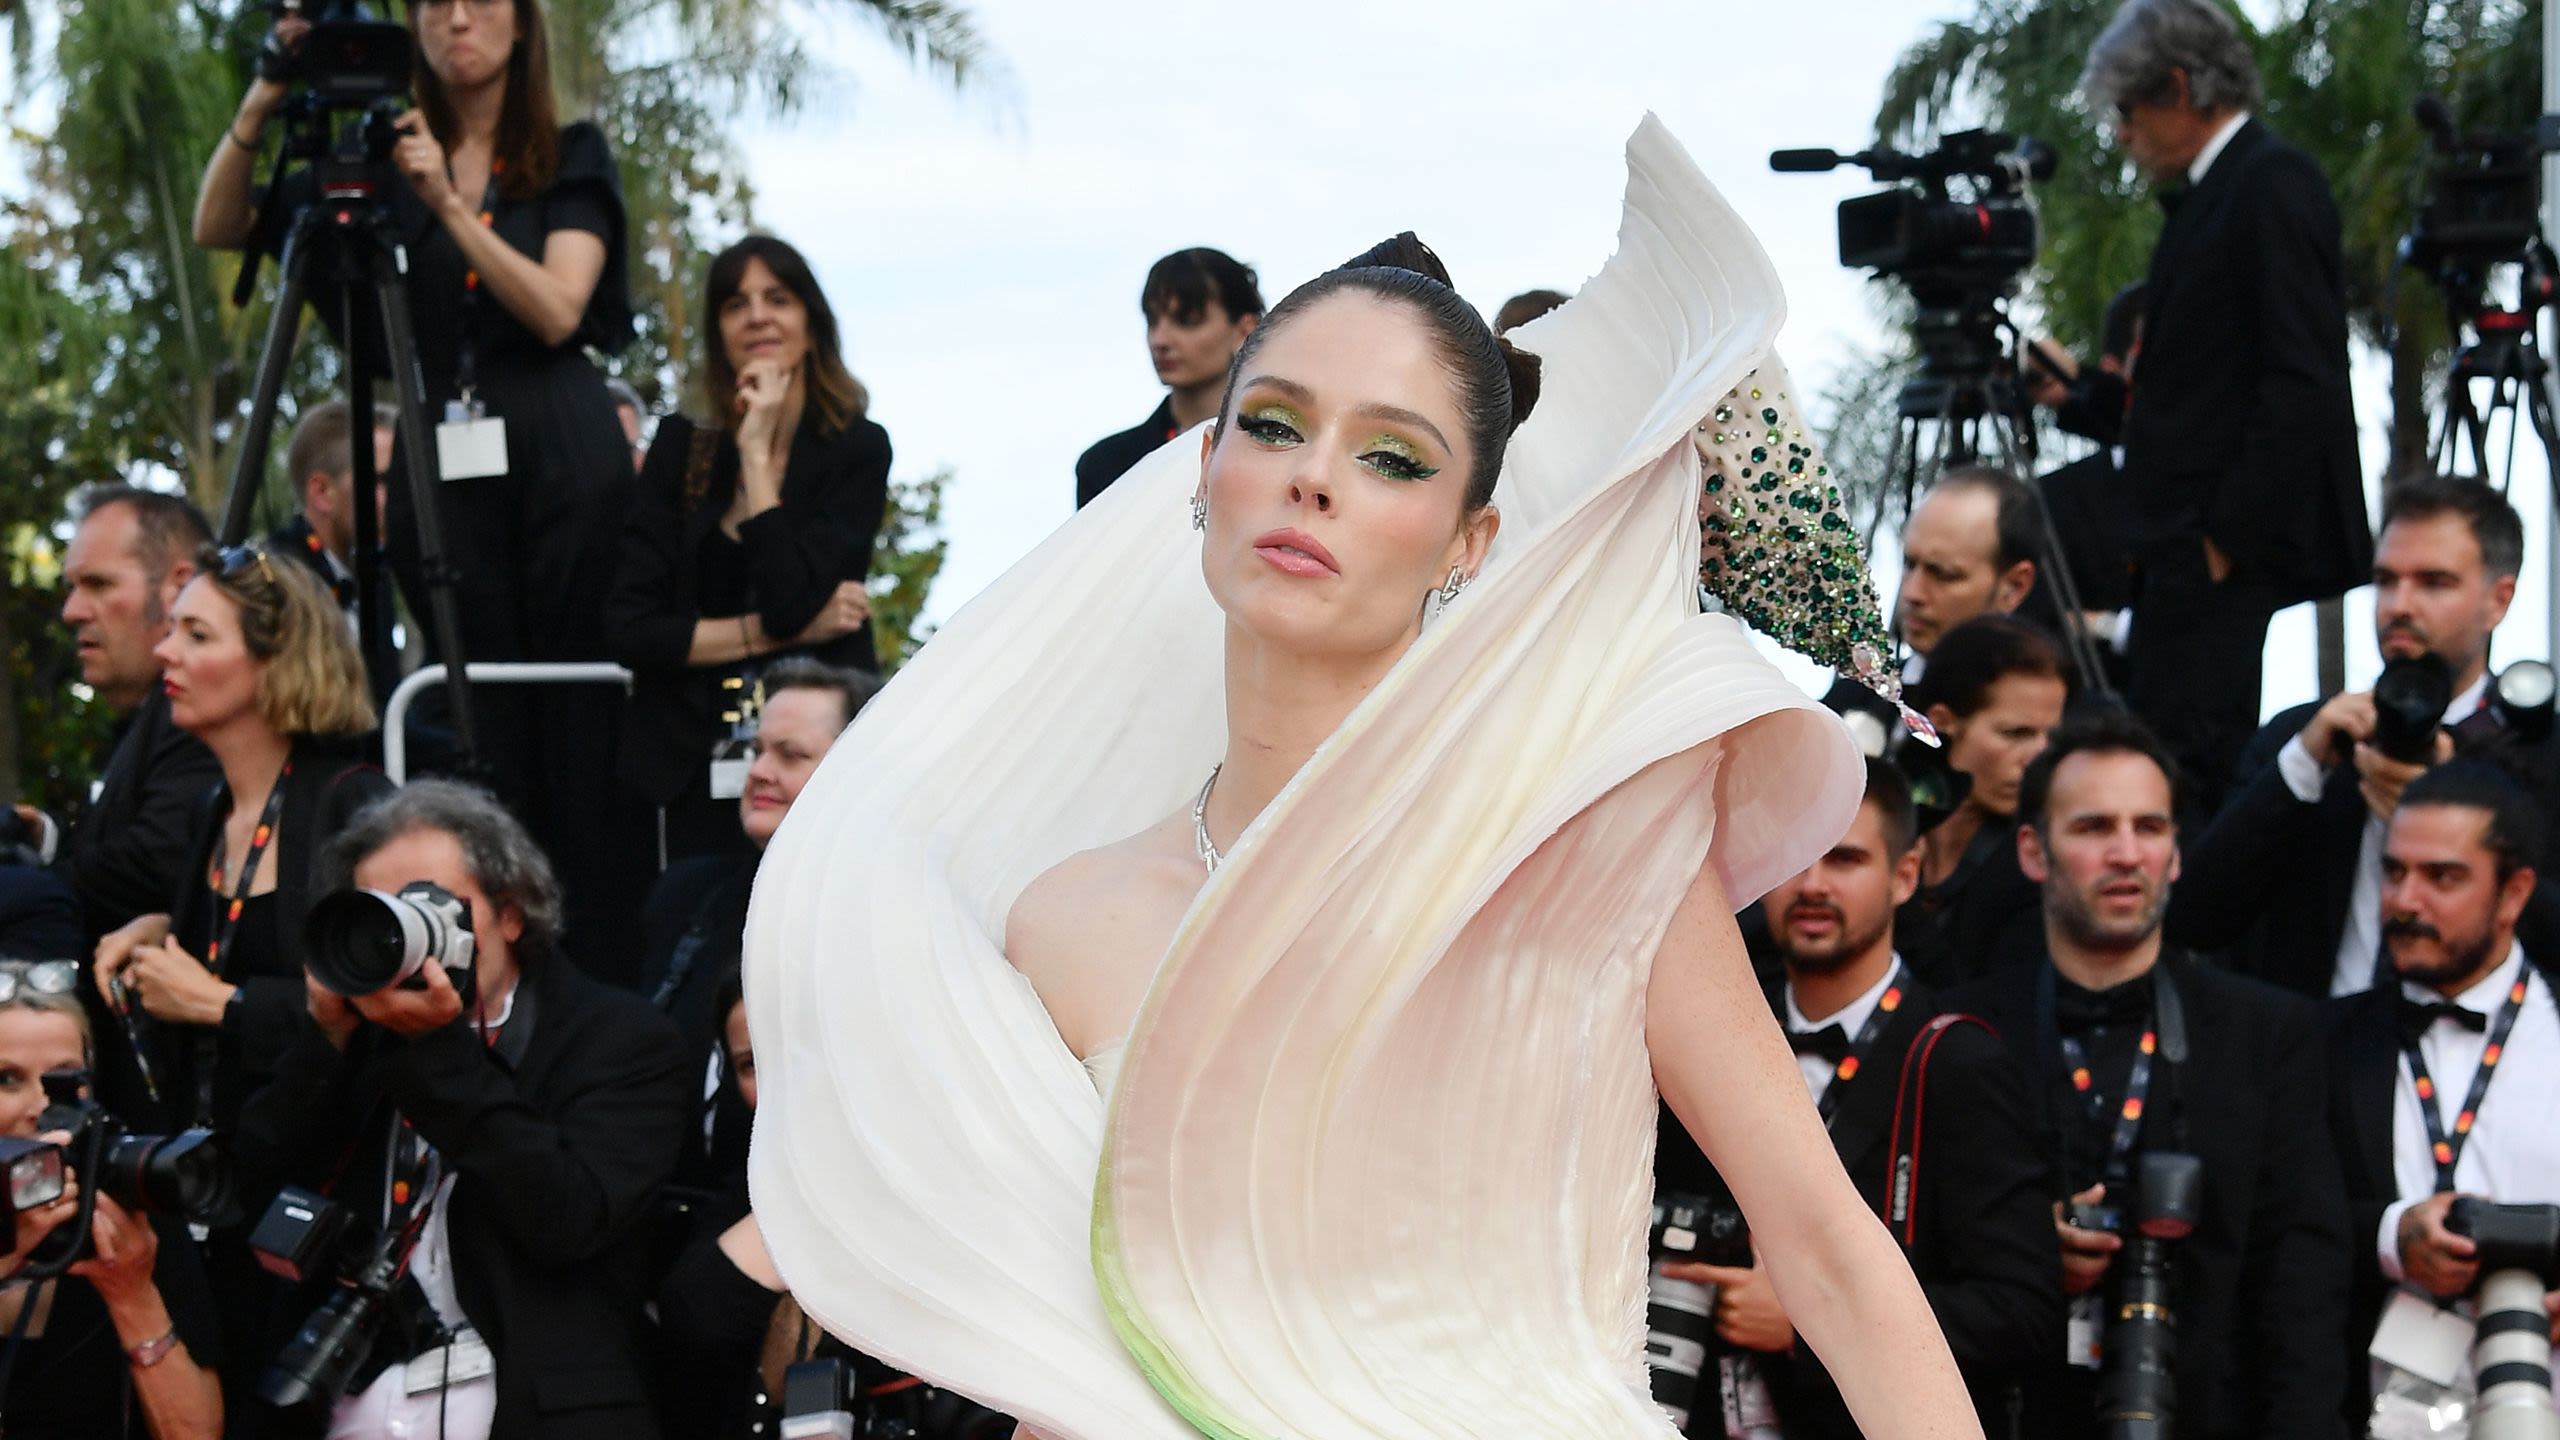 Coco Rocha Makes Her Own Style Lane at Cannes